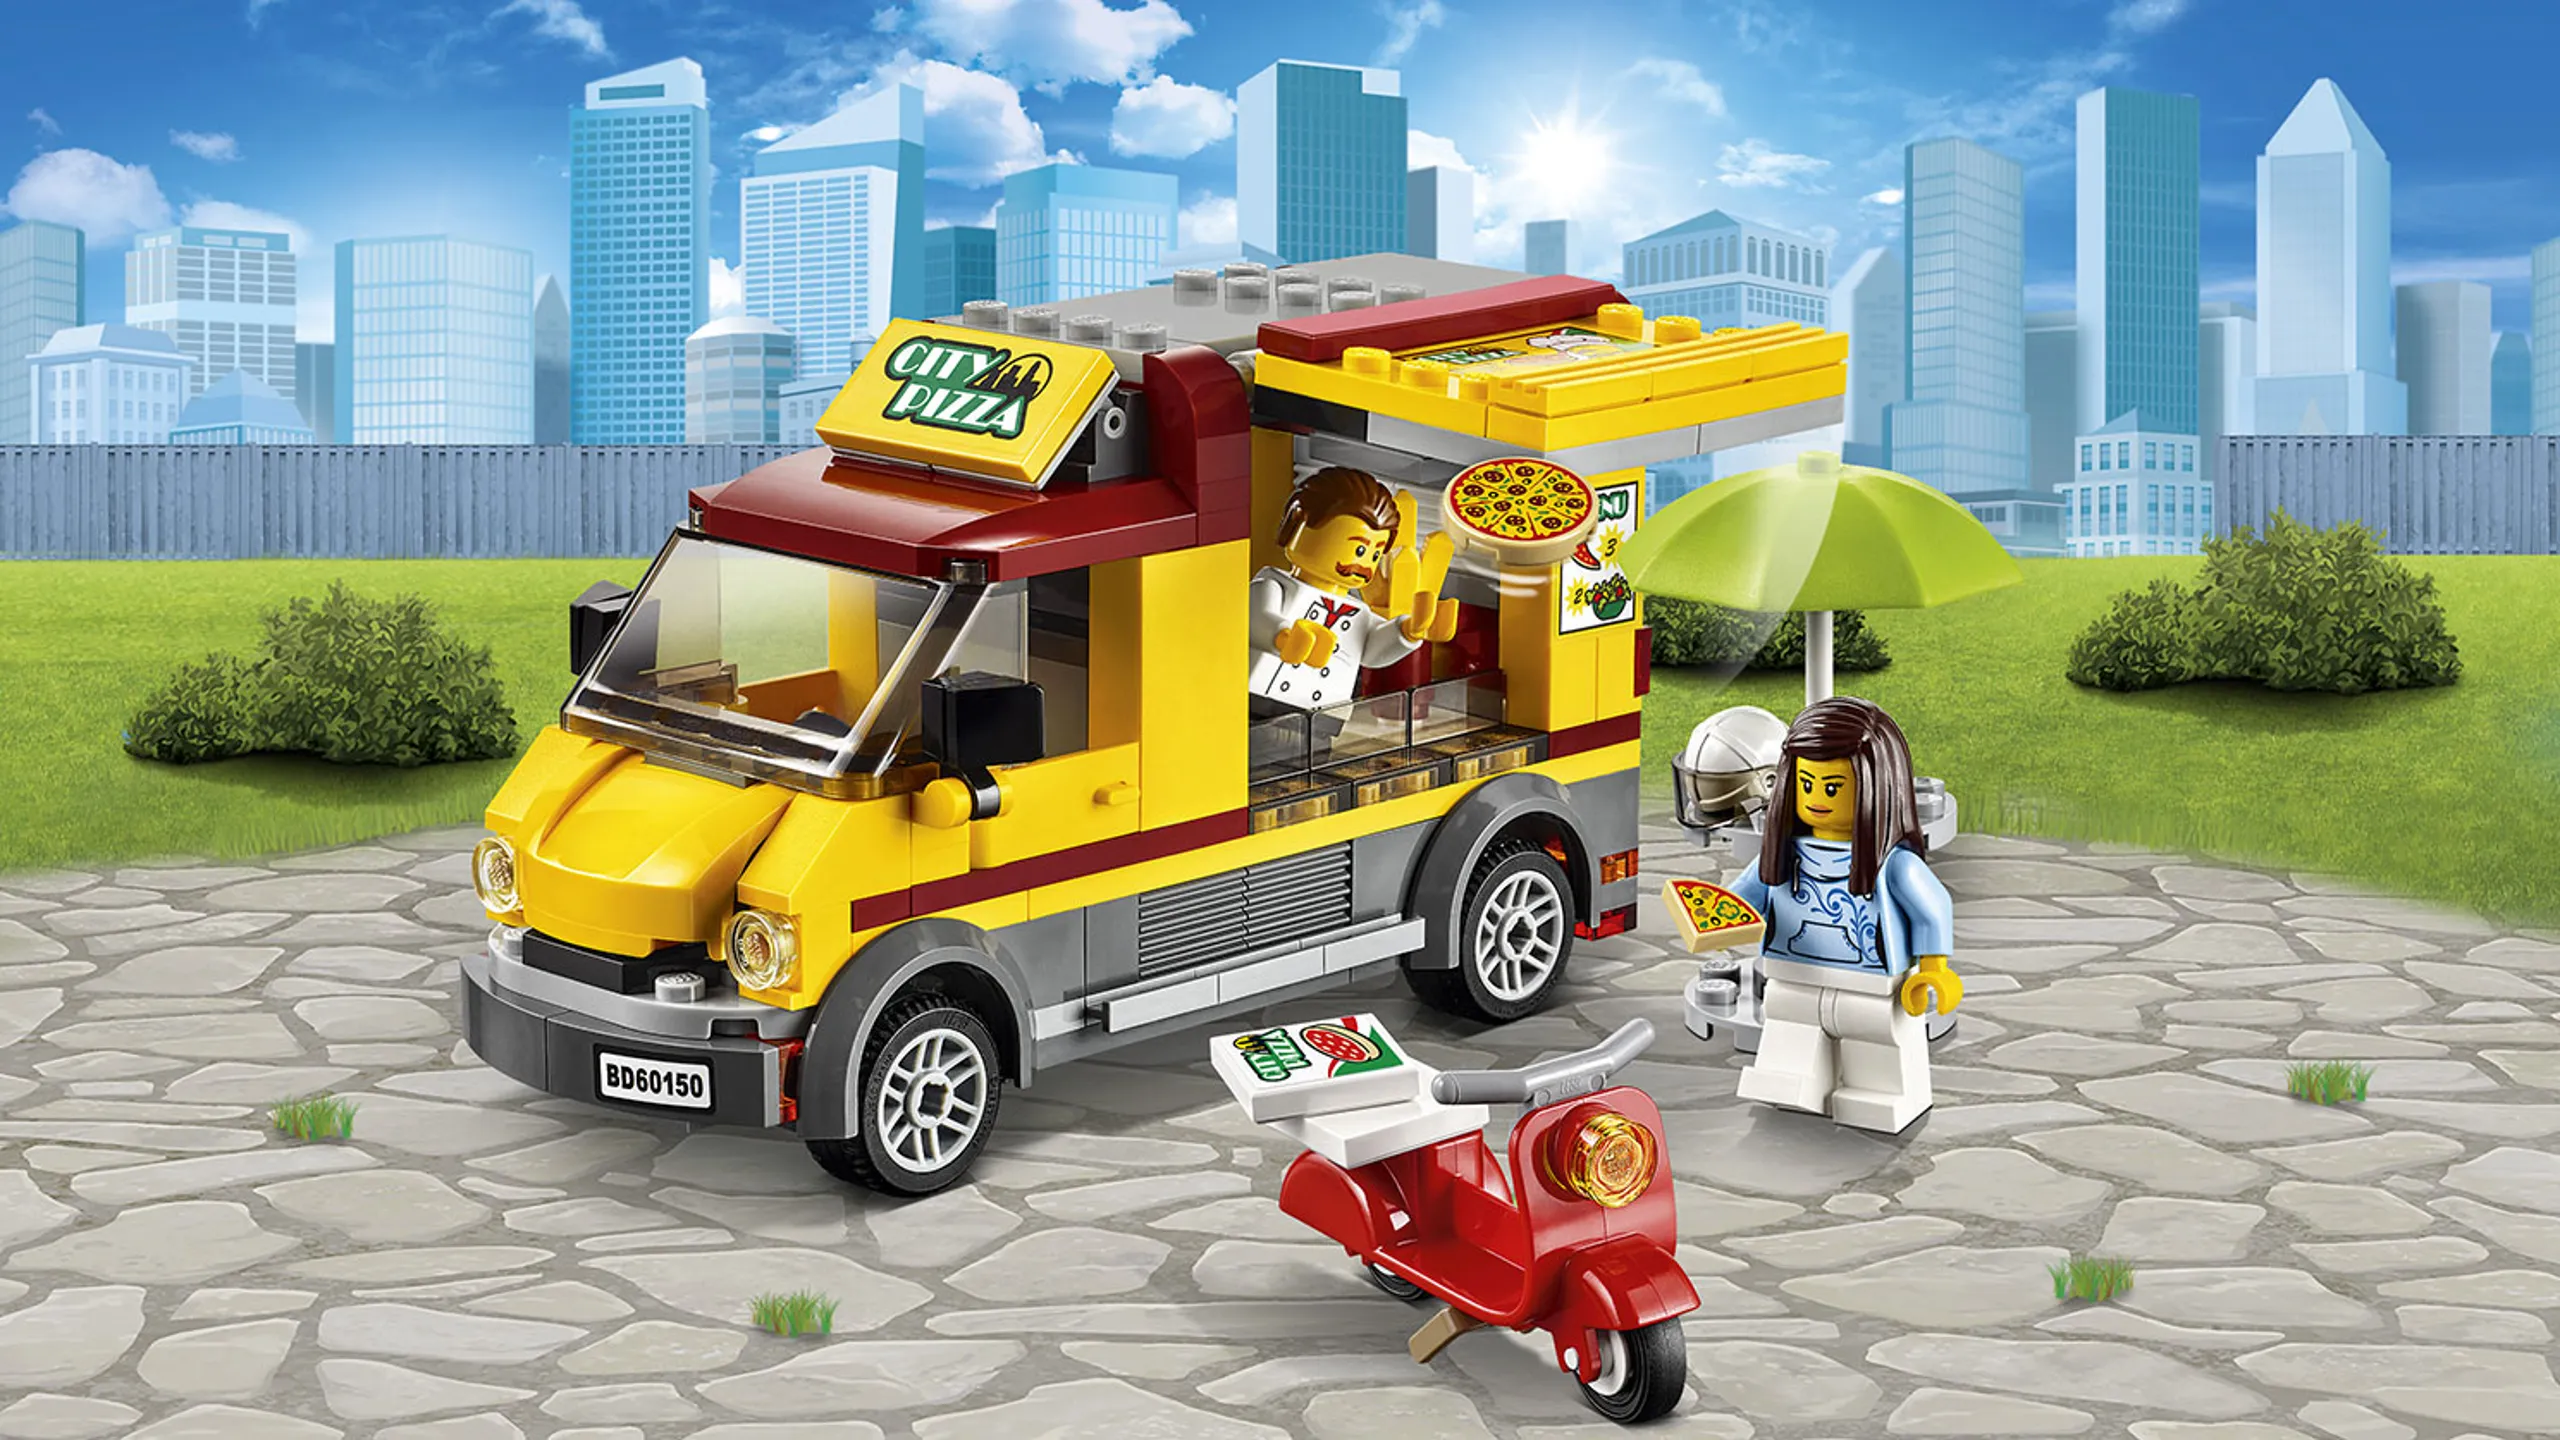 LEGO City Great Vehicles - 60150 Pizza Van - The pizza van sells pizzas on the city square, but also makes deliveries with the scooter.